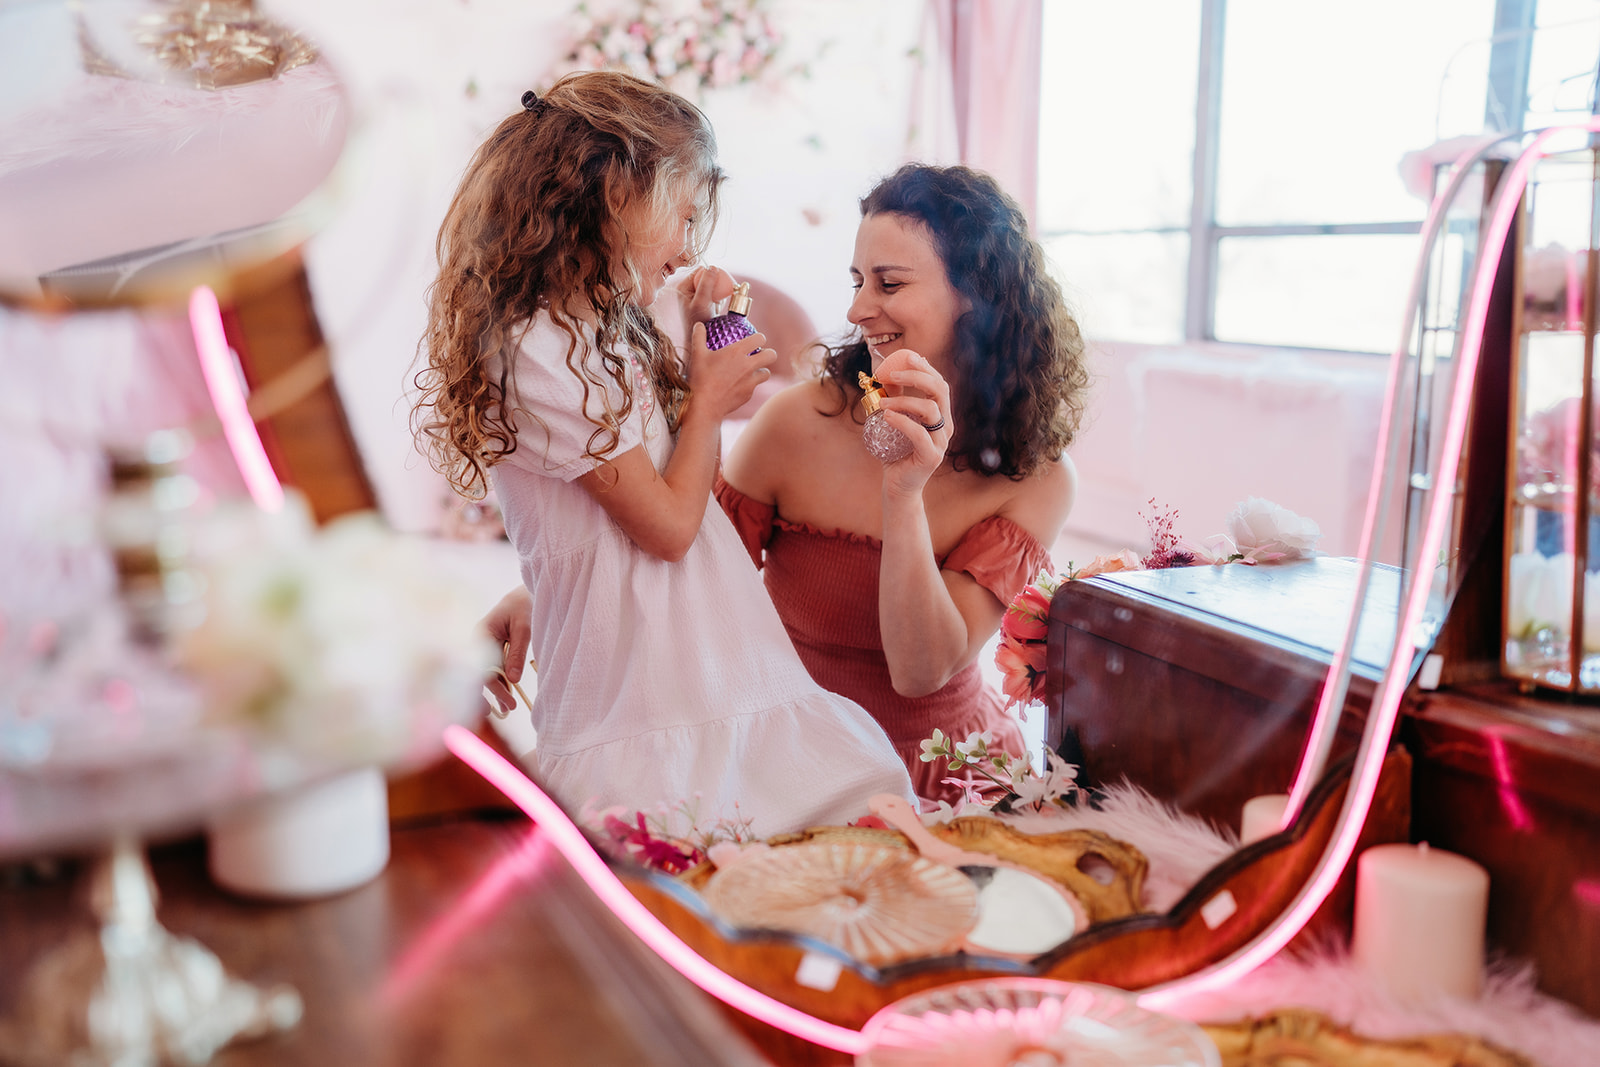 mother daughter photoshoot with mother kneeling next to her young child as they hold perfume bottles together and smile while in front of a vanity mirror captured by Denver family Photographers